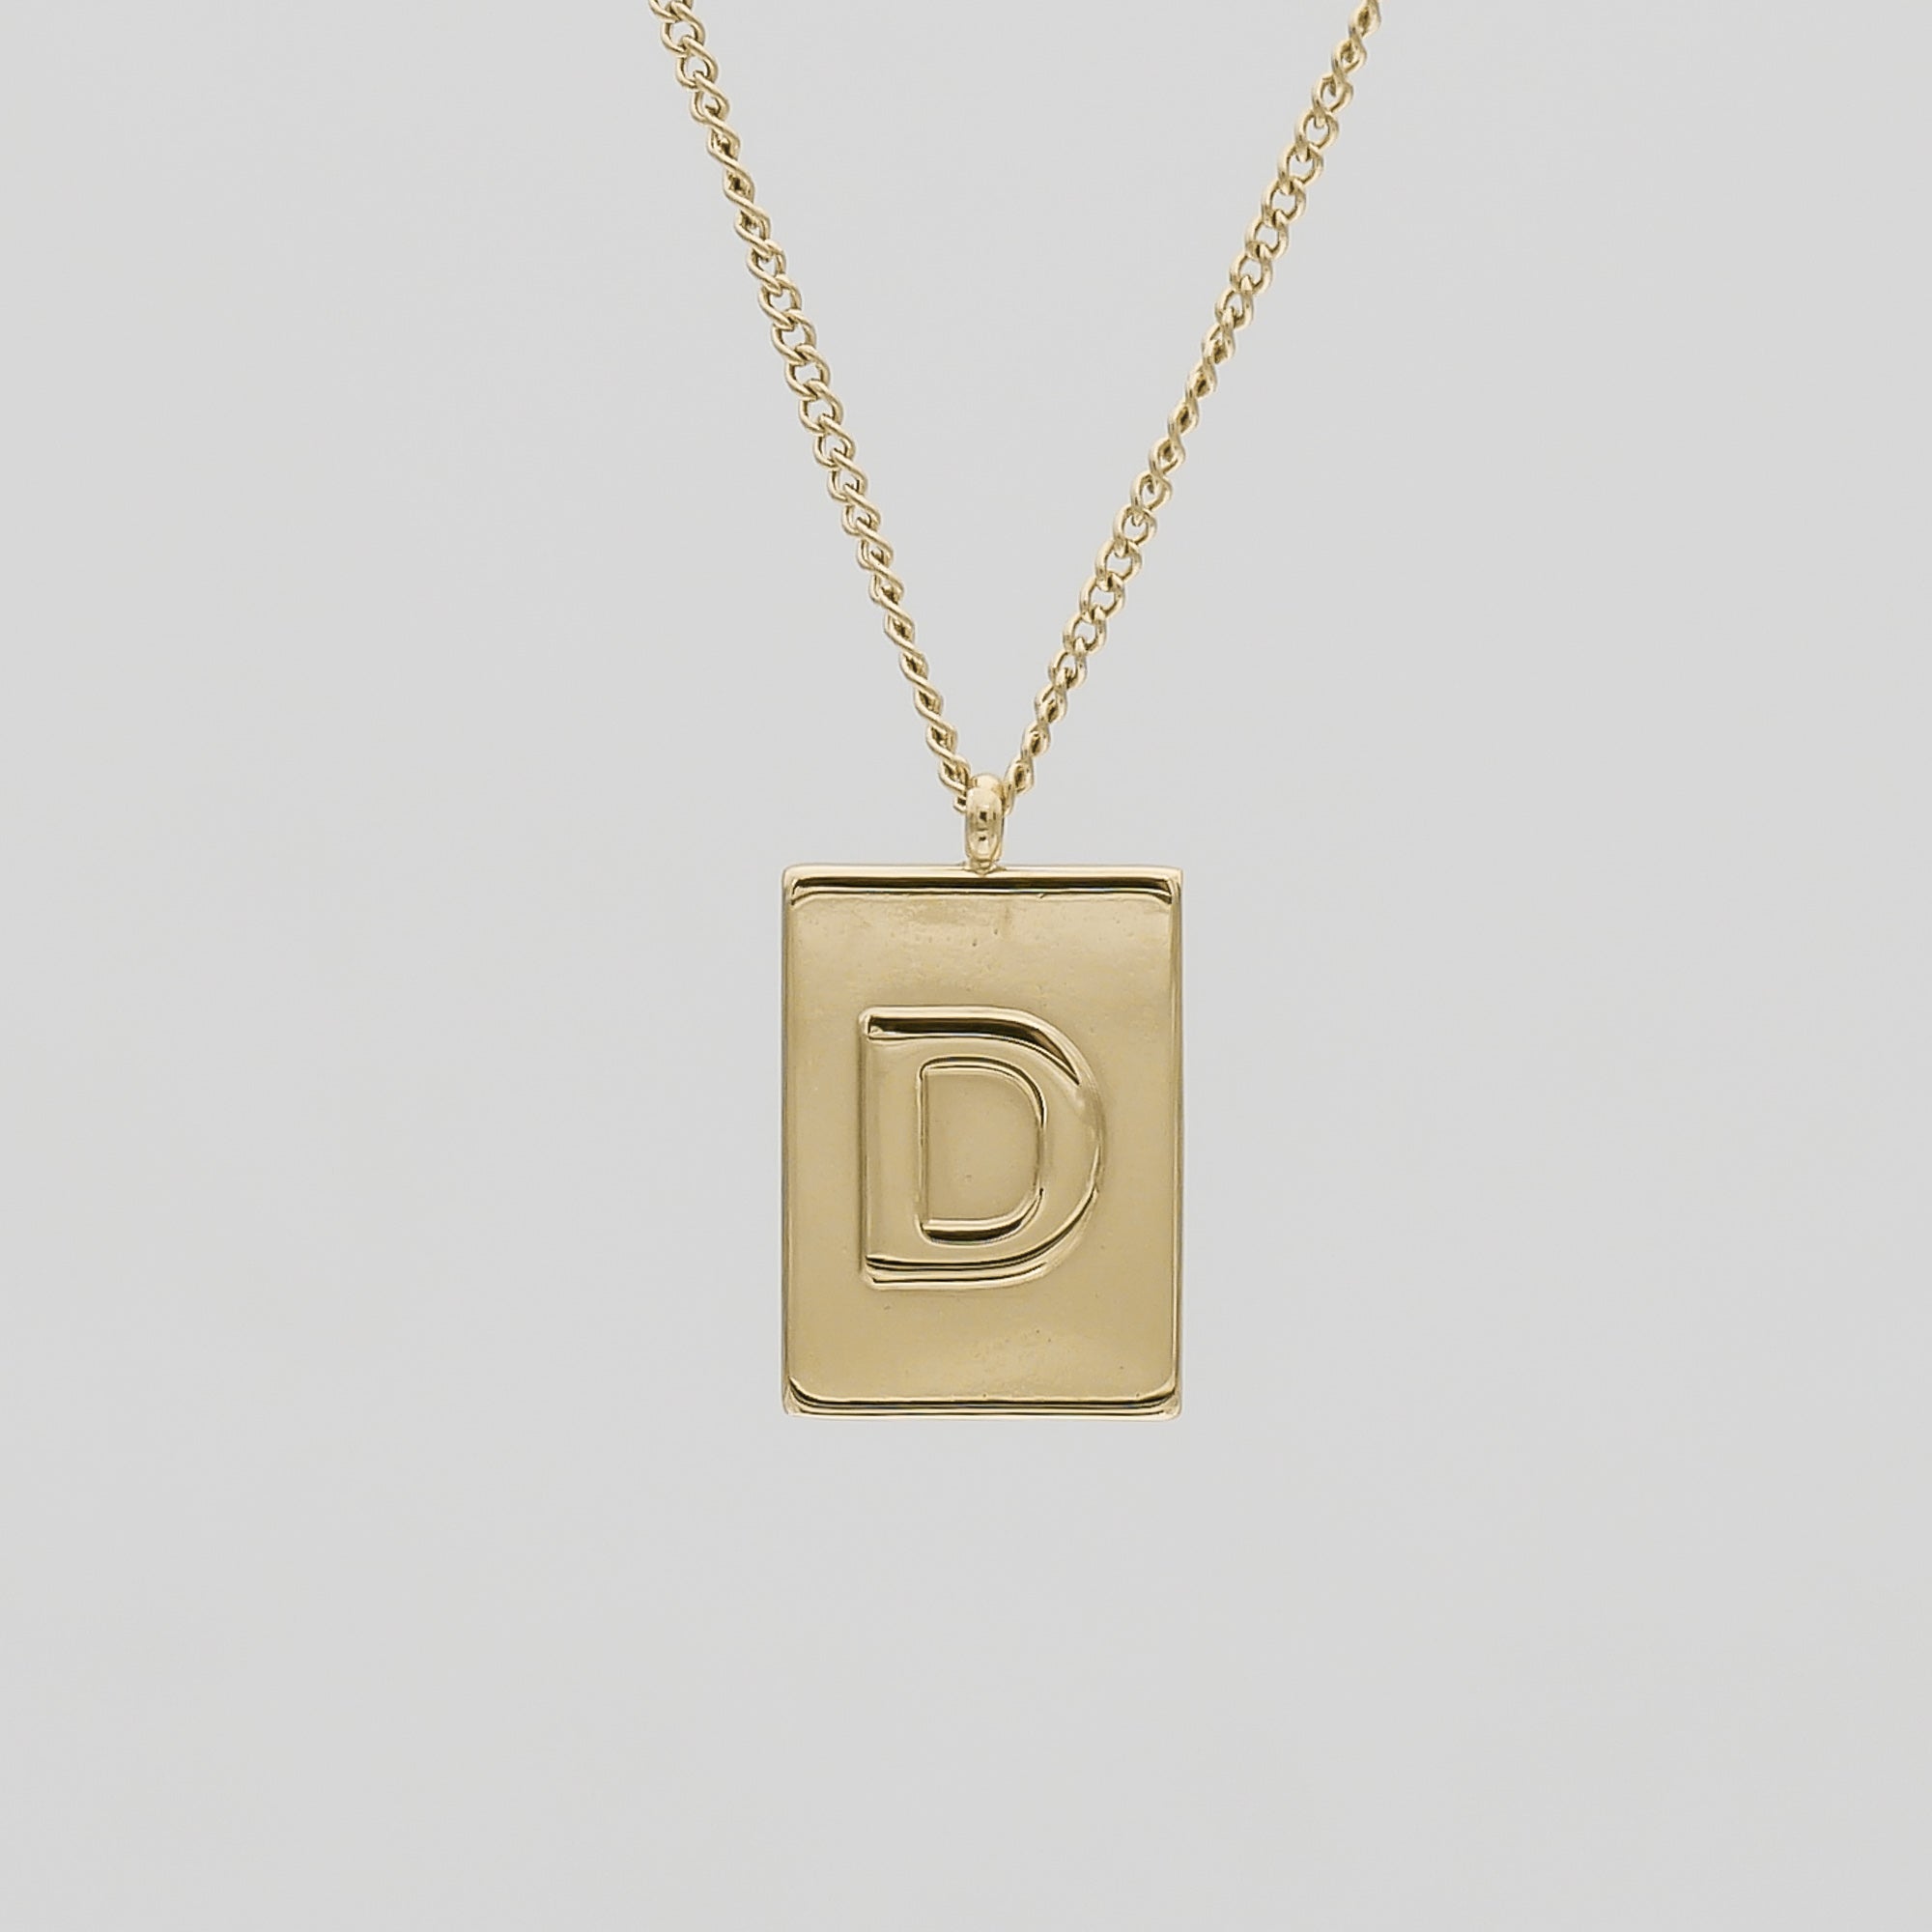 Athena custom initial Gold pendant Necklace, letter D by PRYA